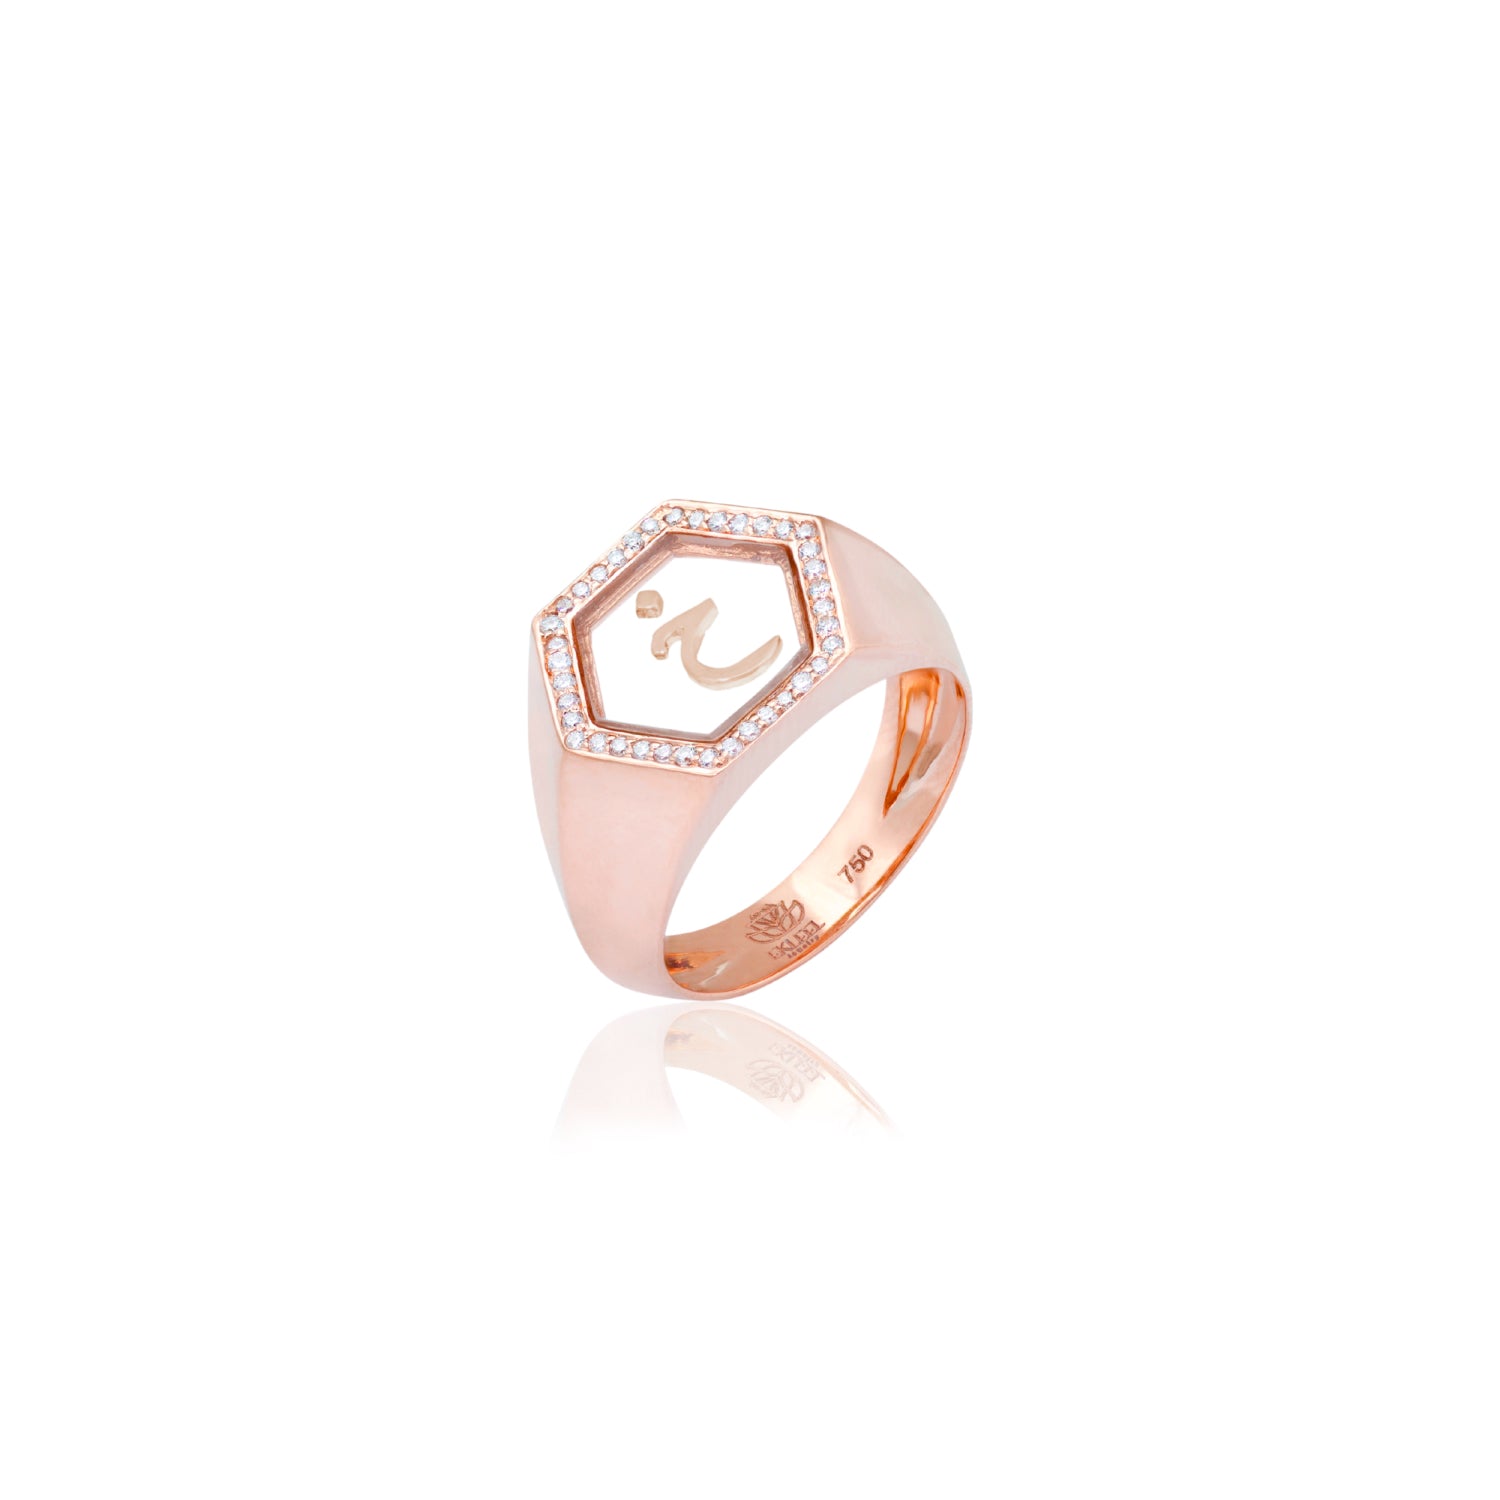 Qamoos 2.0 Letter خ Plexiglass and Diamond Signet Ring in Rose Gold